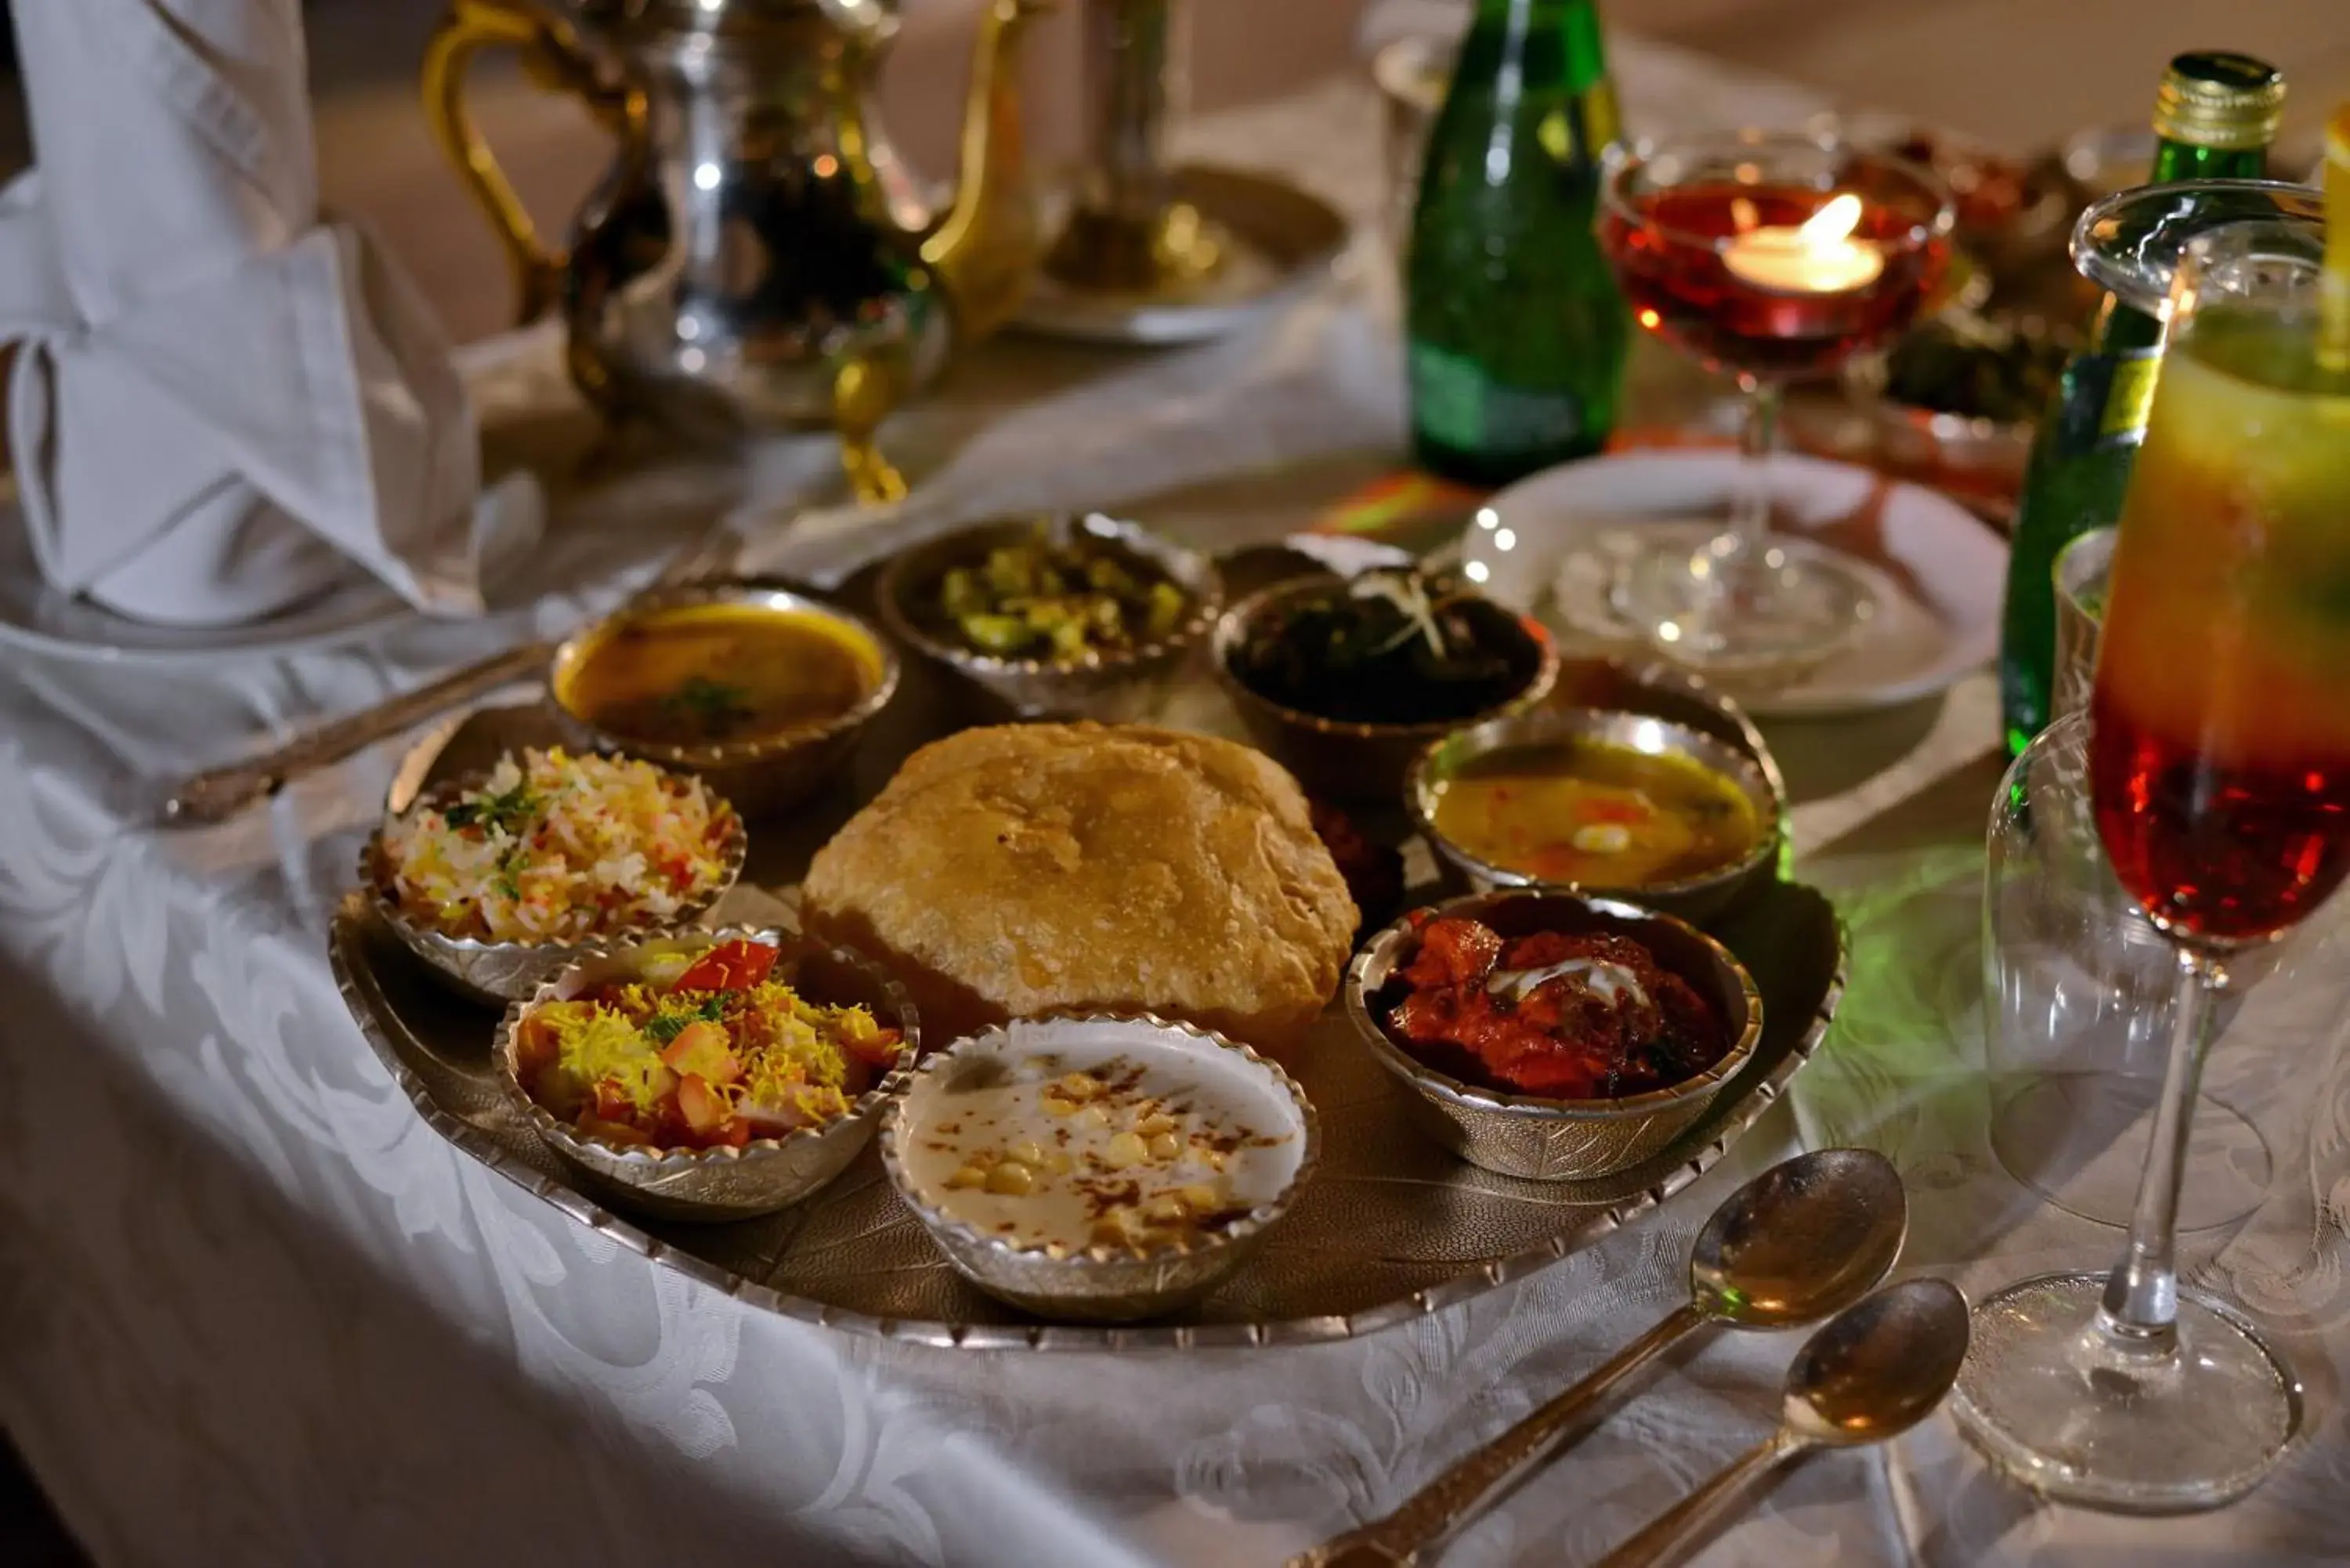 Food and drinks in BrijRama Palace, Varanasi by the Ganges